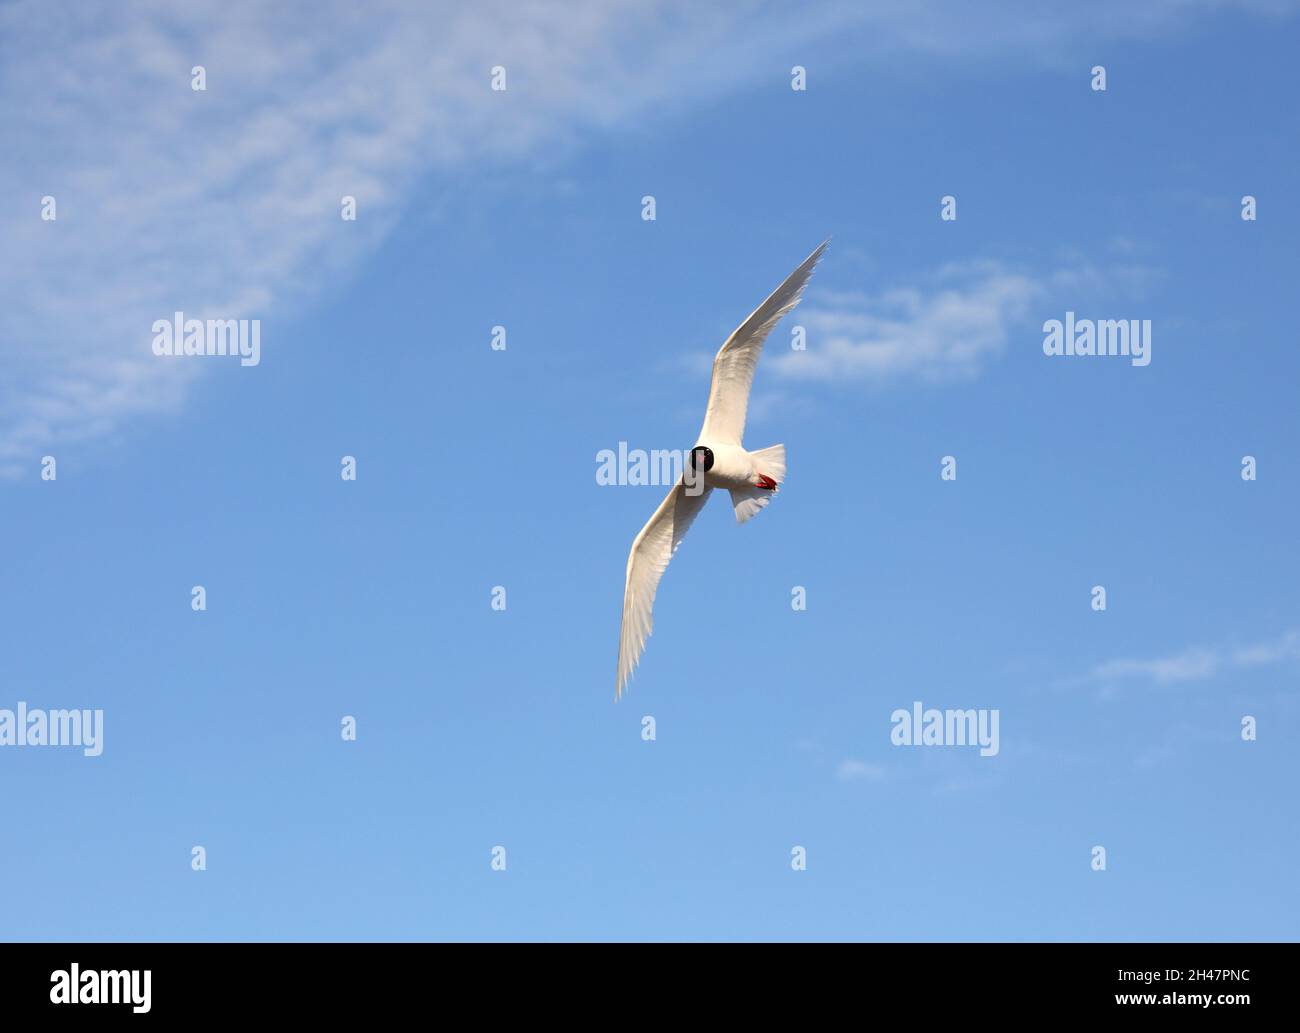 white seagull with black head flies high in the blue sky in summer Stock Photo